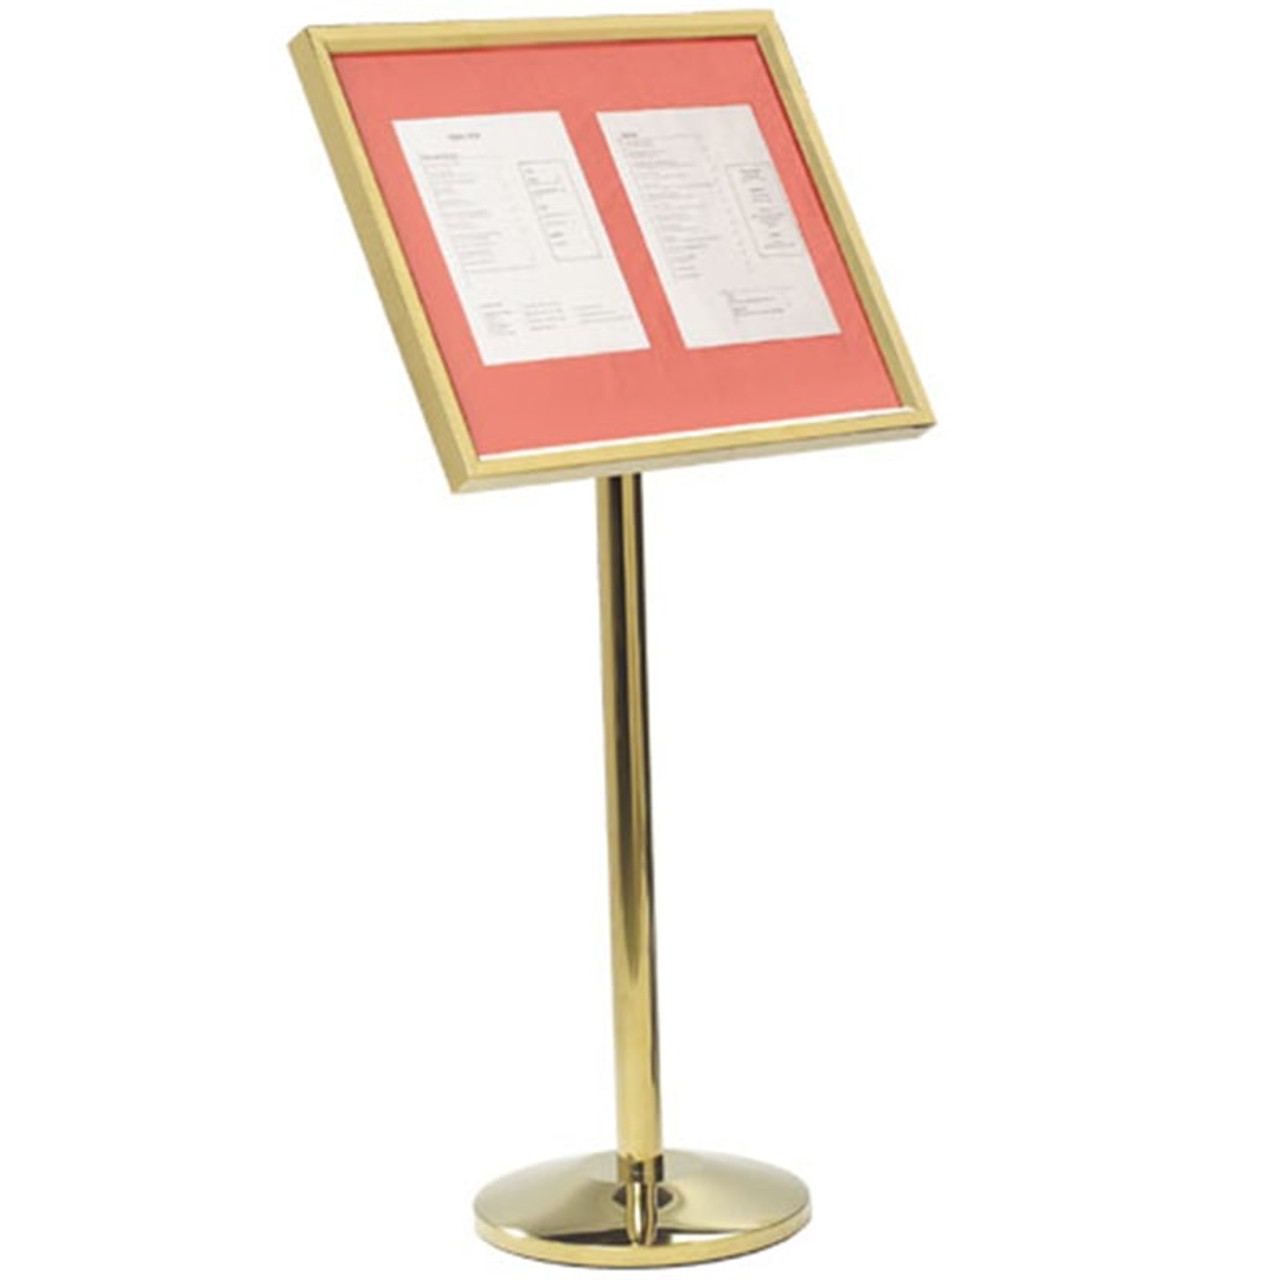 Aarco Products P-5B Small Menu and Poster Holder - Brass